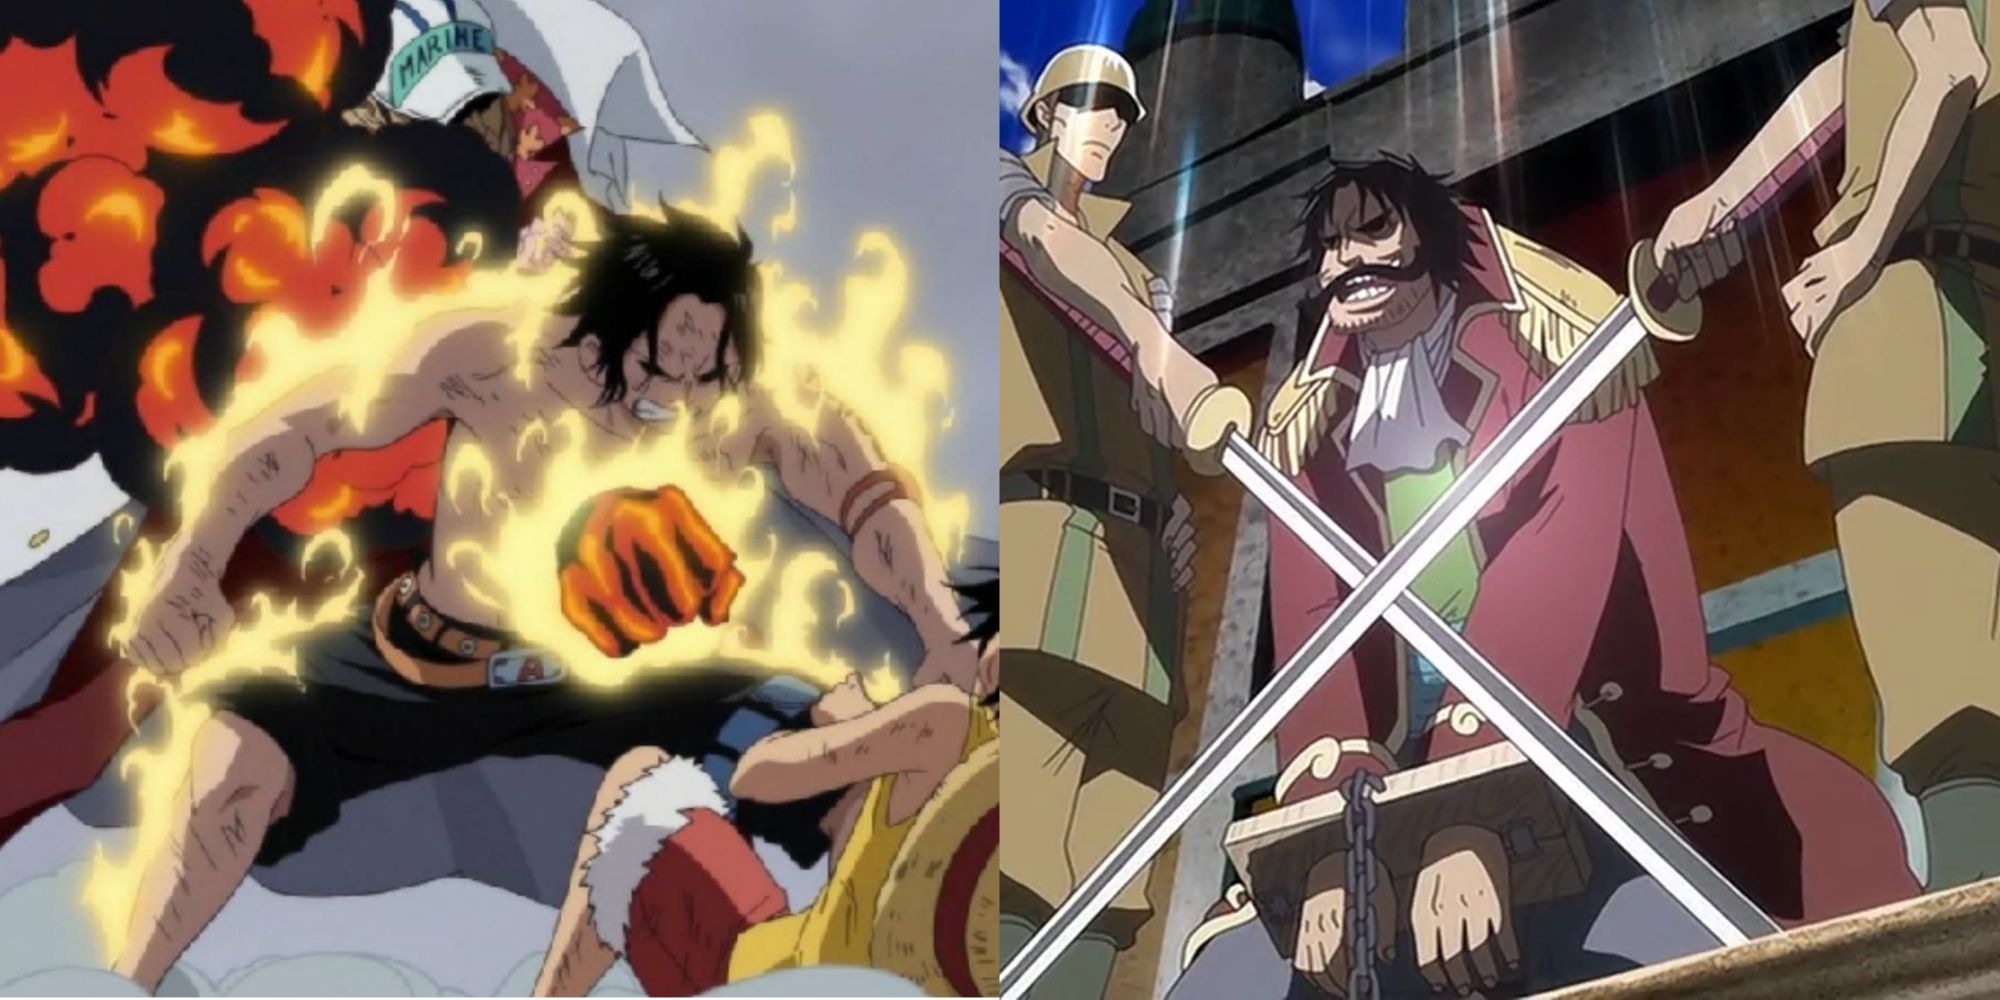 Ranking the 6 most important deaths in One Piece